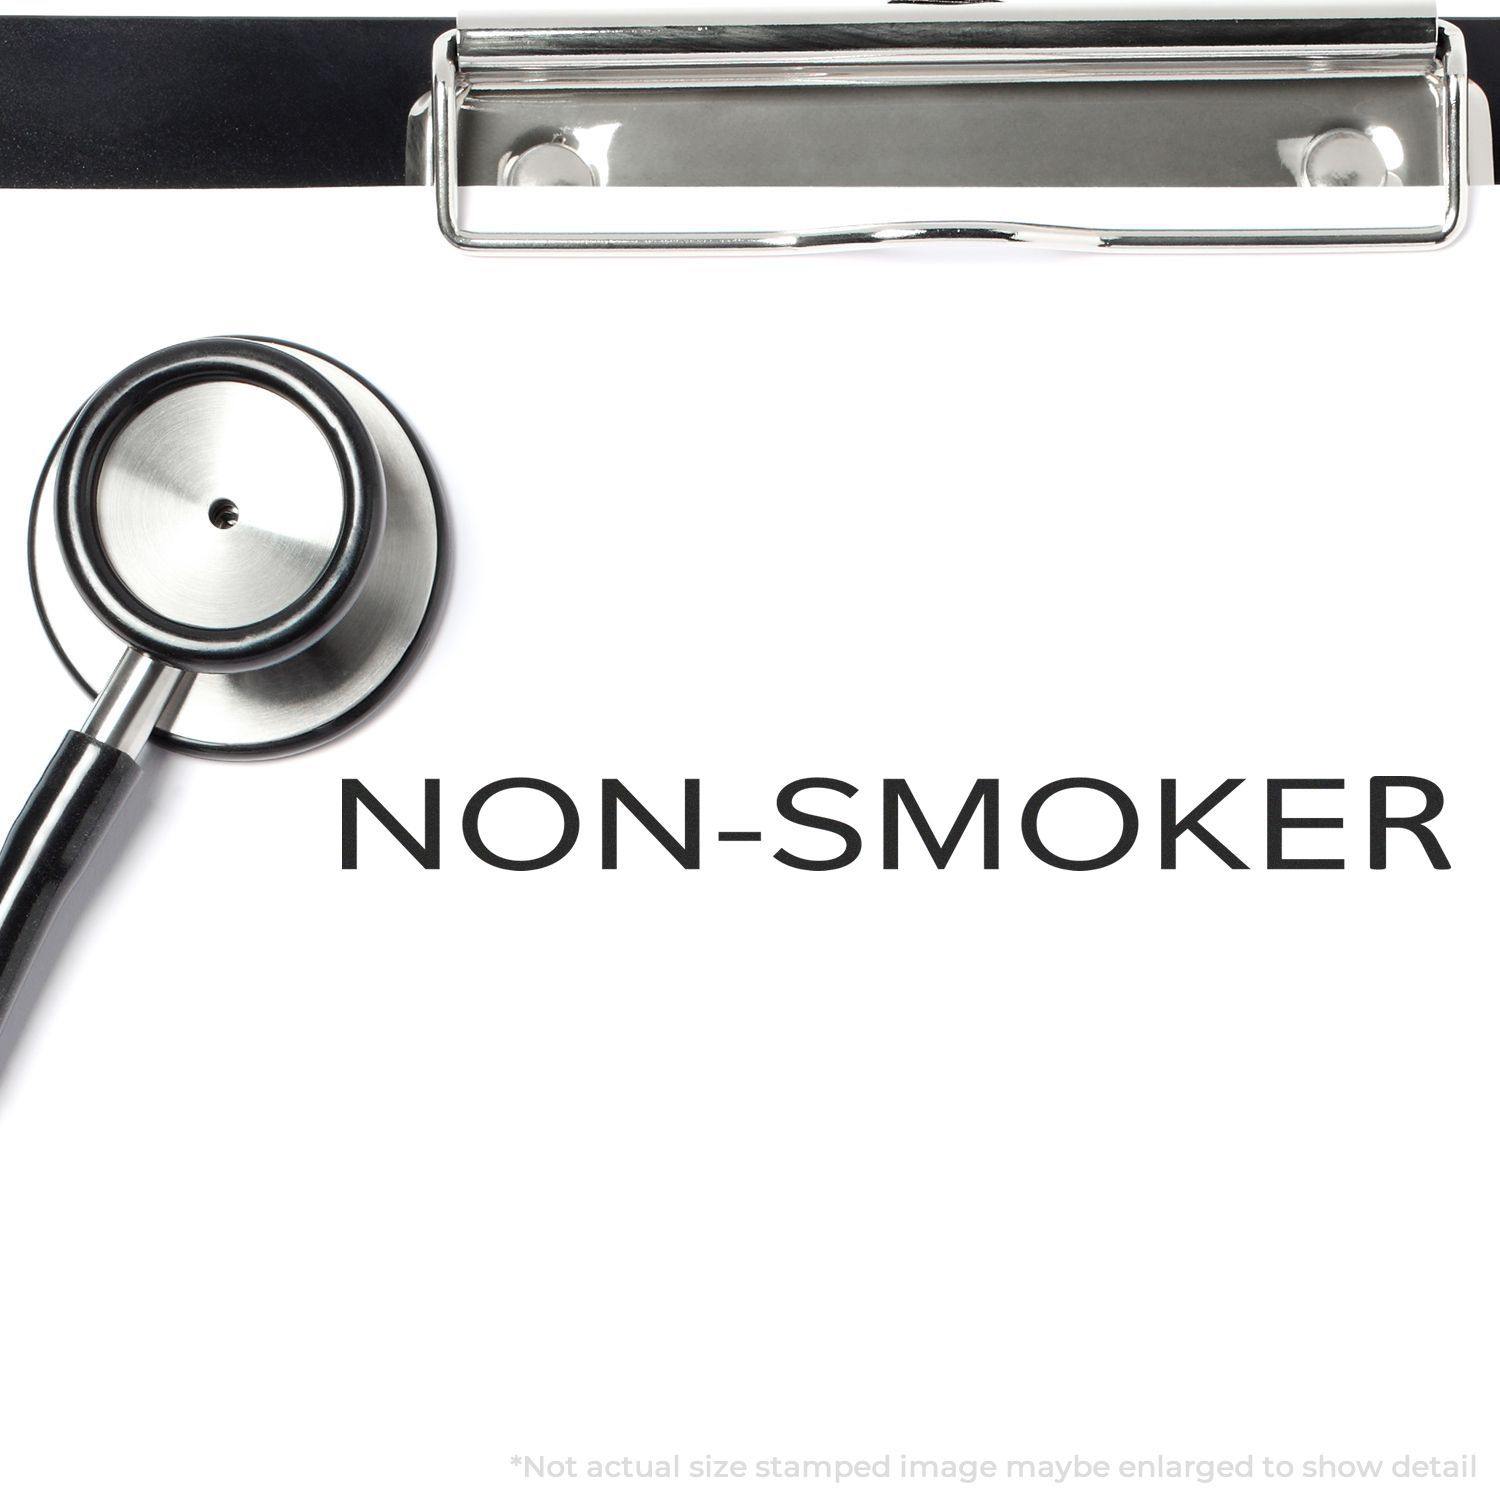 In Use Slim Pre-Inked Narrow Font Non-Smoker Stamp Image